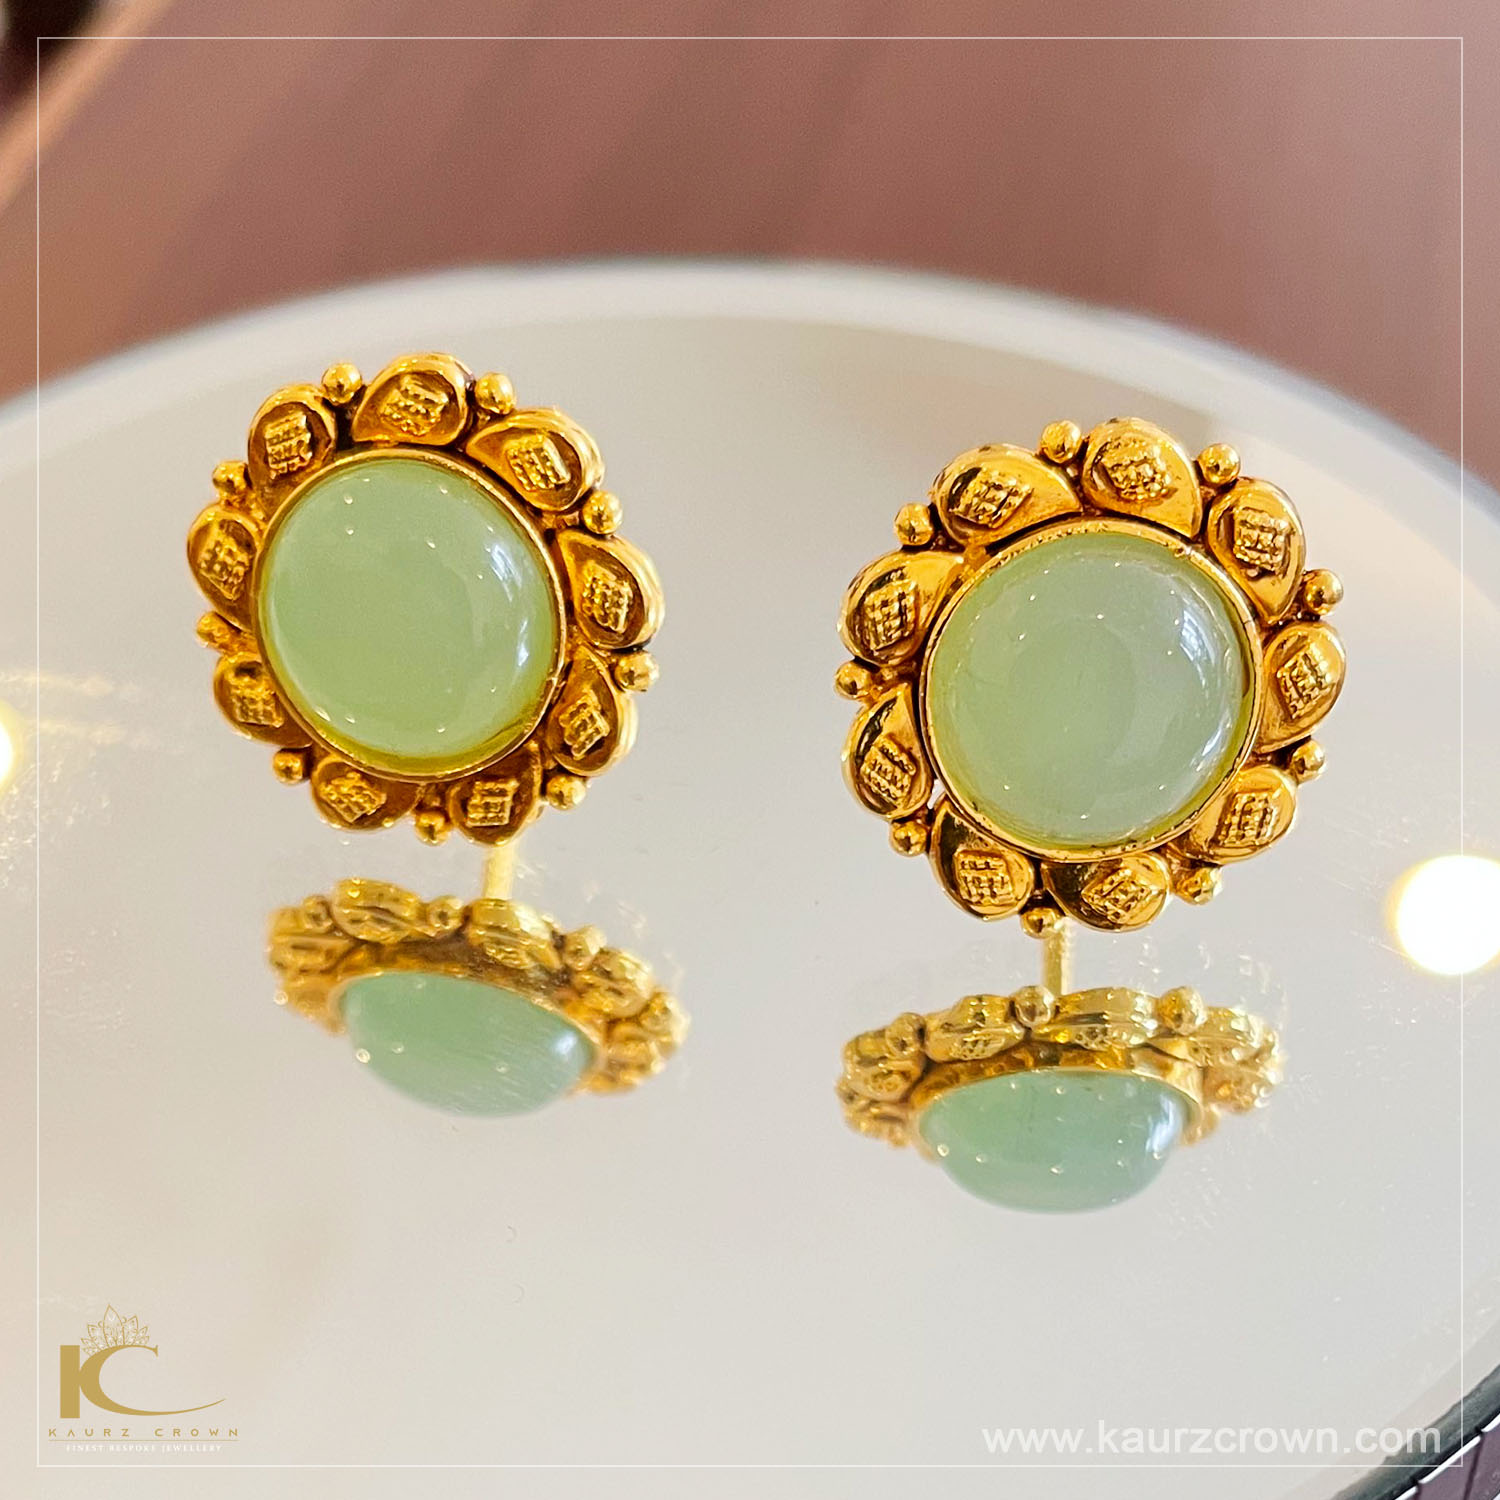 Chakor Traditional Antique Gold Plated Earring Studs